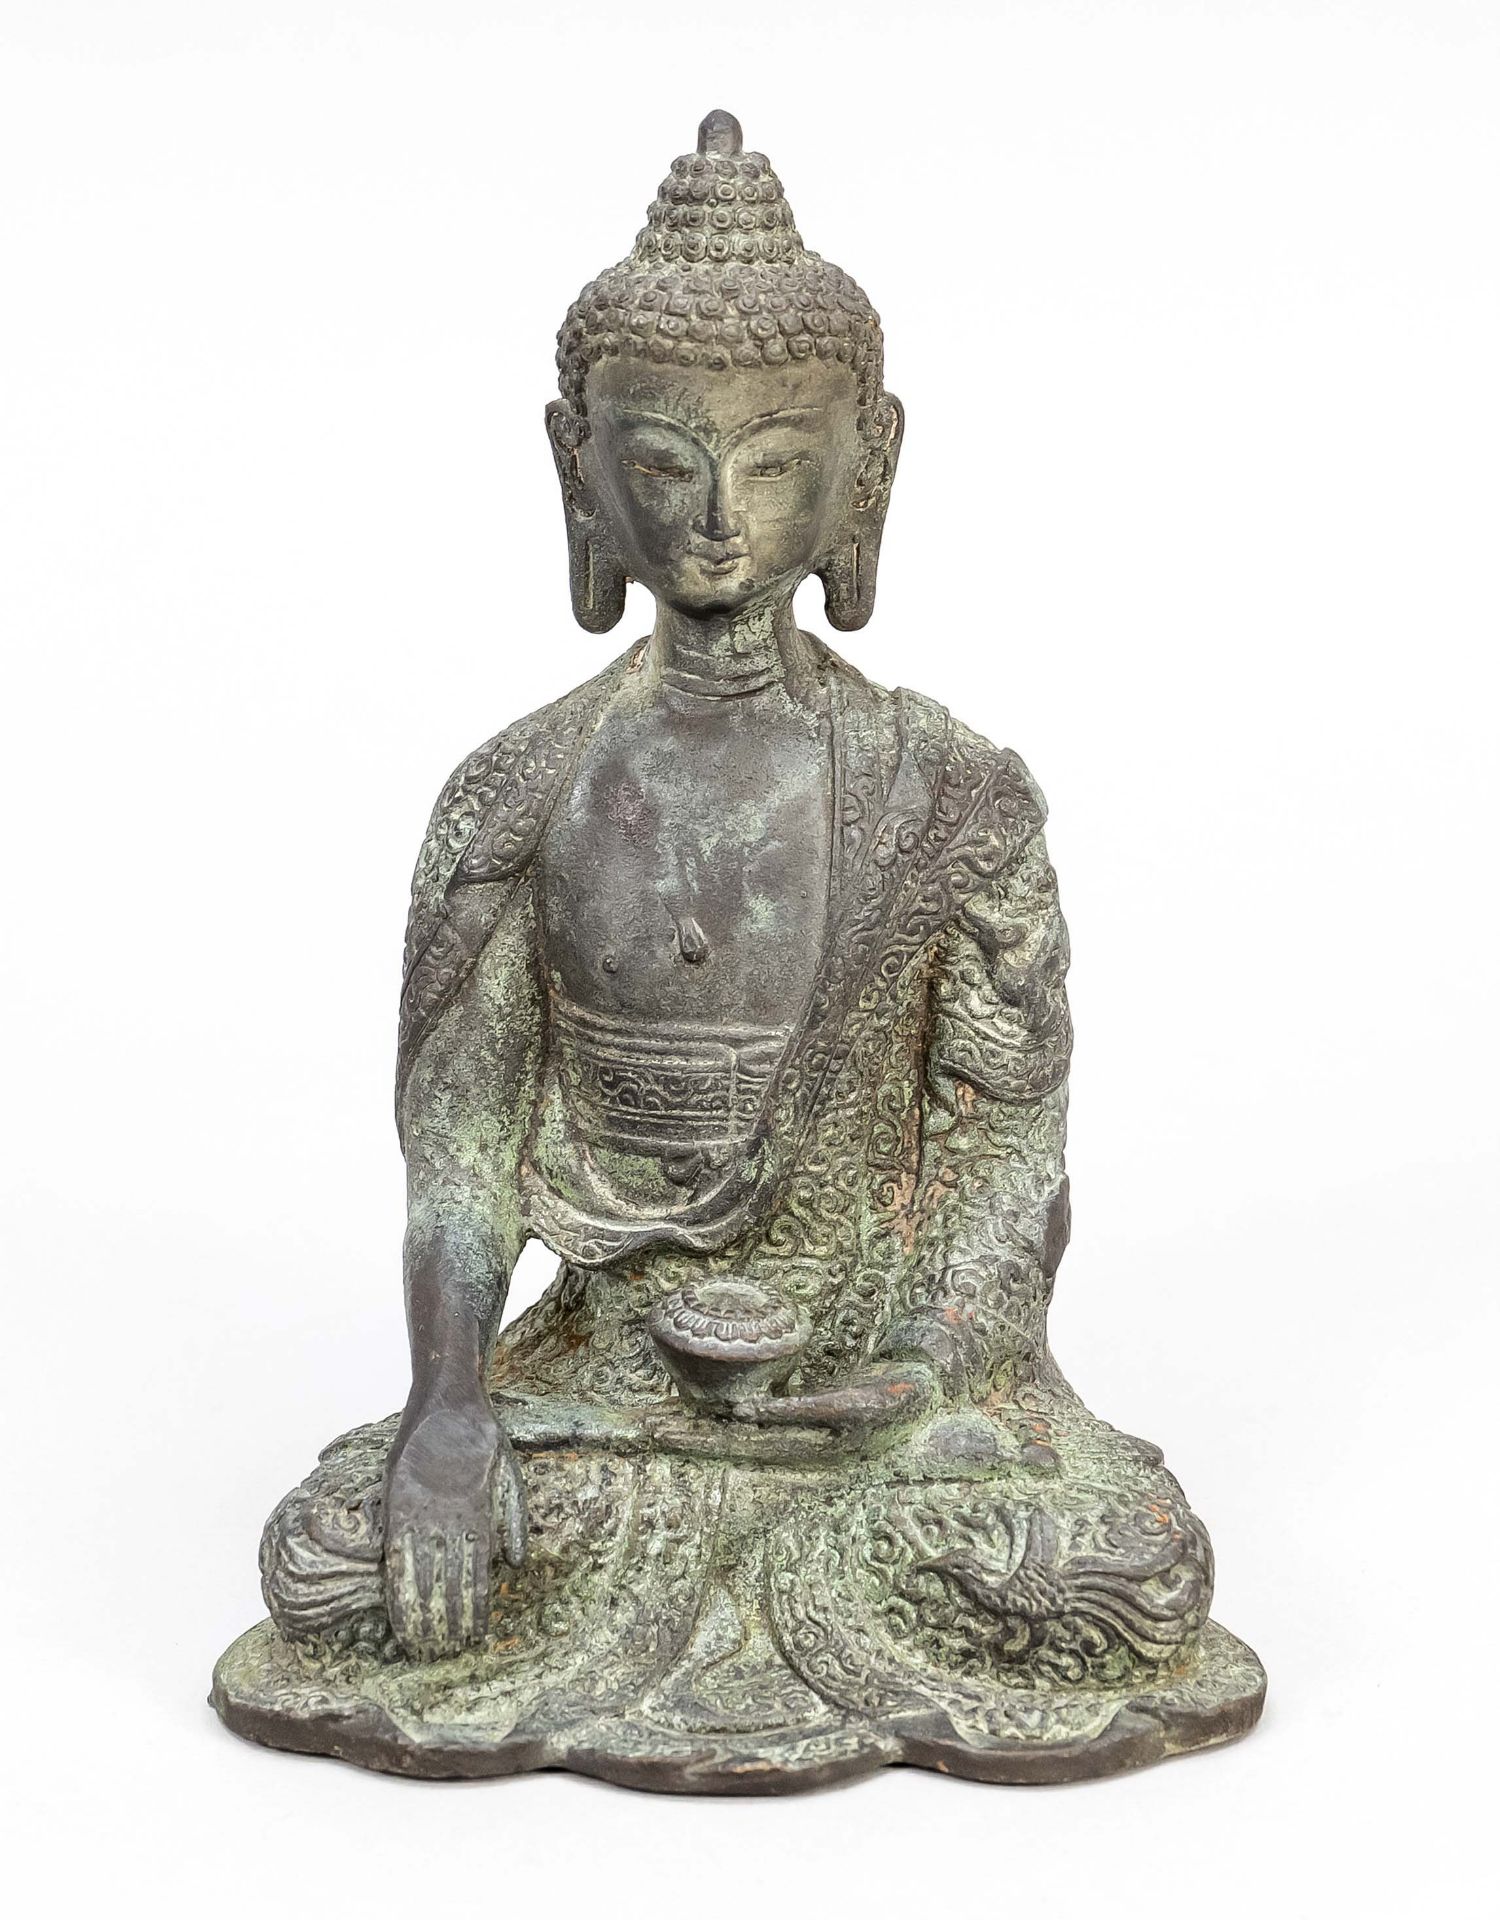 Bronze sculpture Buddha Shakyamuni, China, 20th century, in the style of the Qing Dynasty(1644-1911)